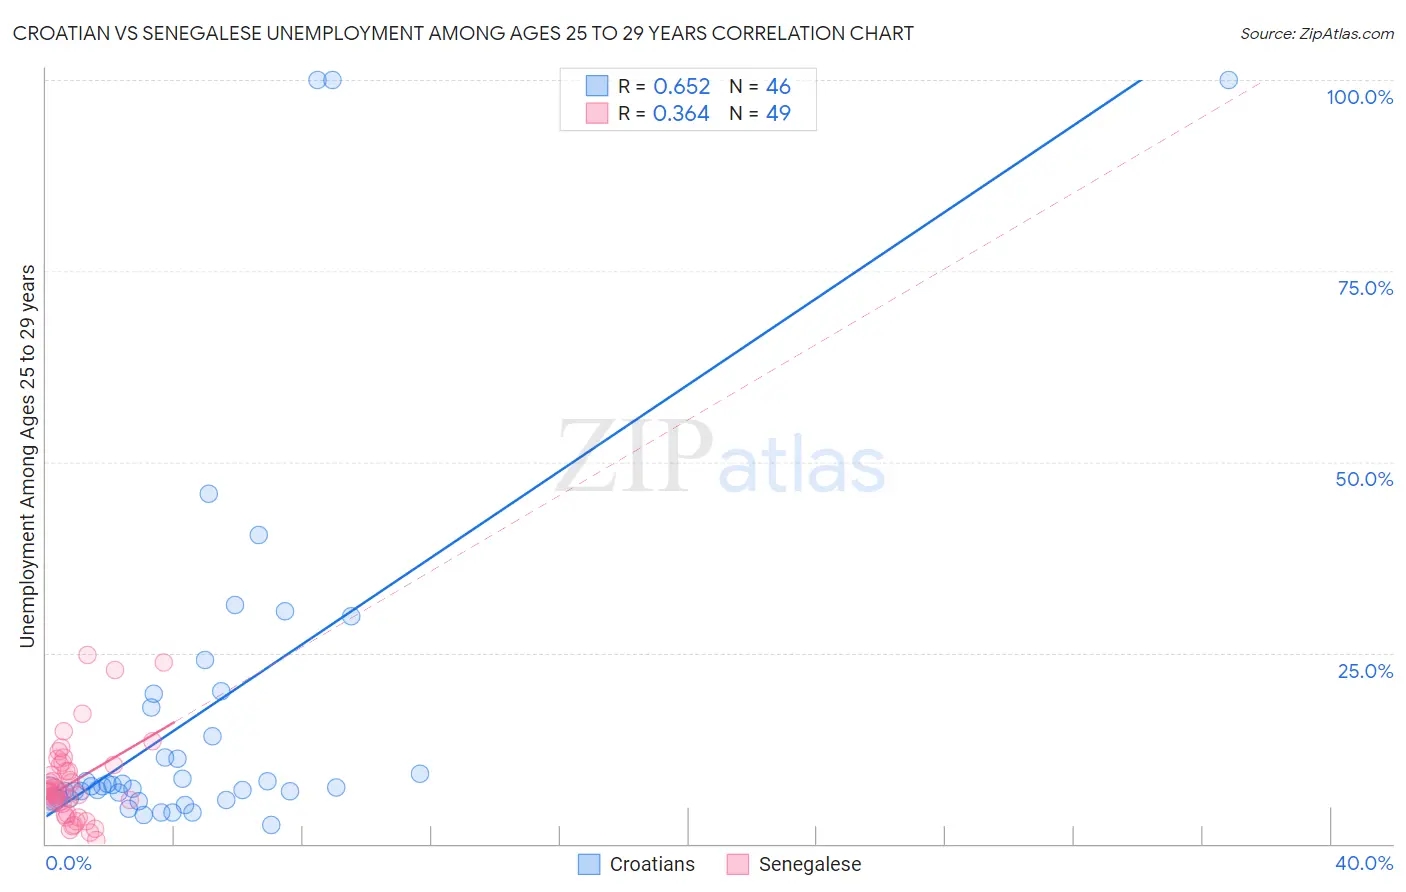 Croatian vs Senegalese Unemployment Among Ages 25 to 29 years